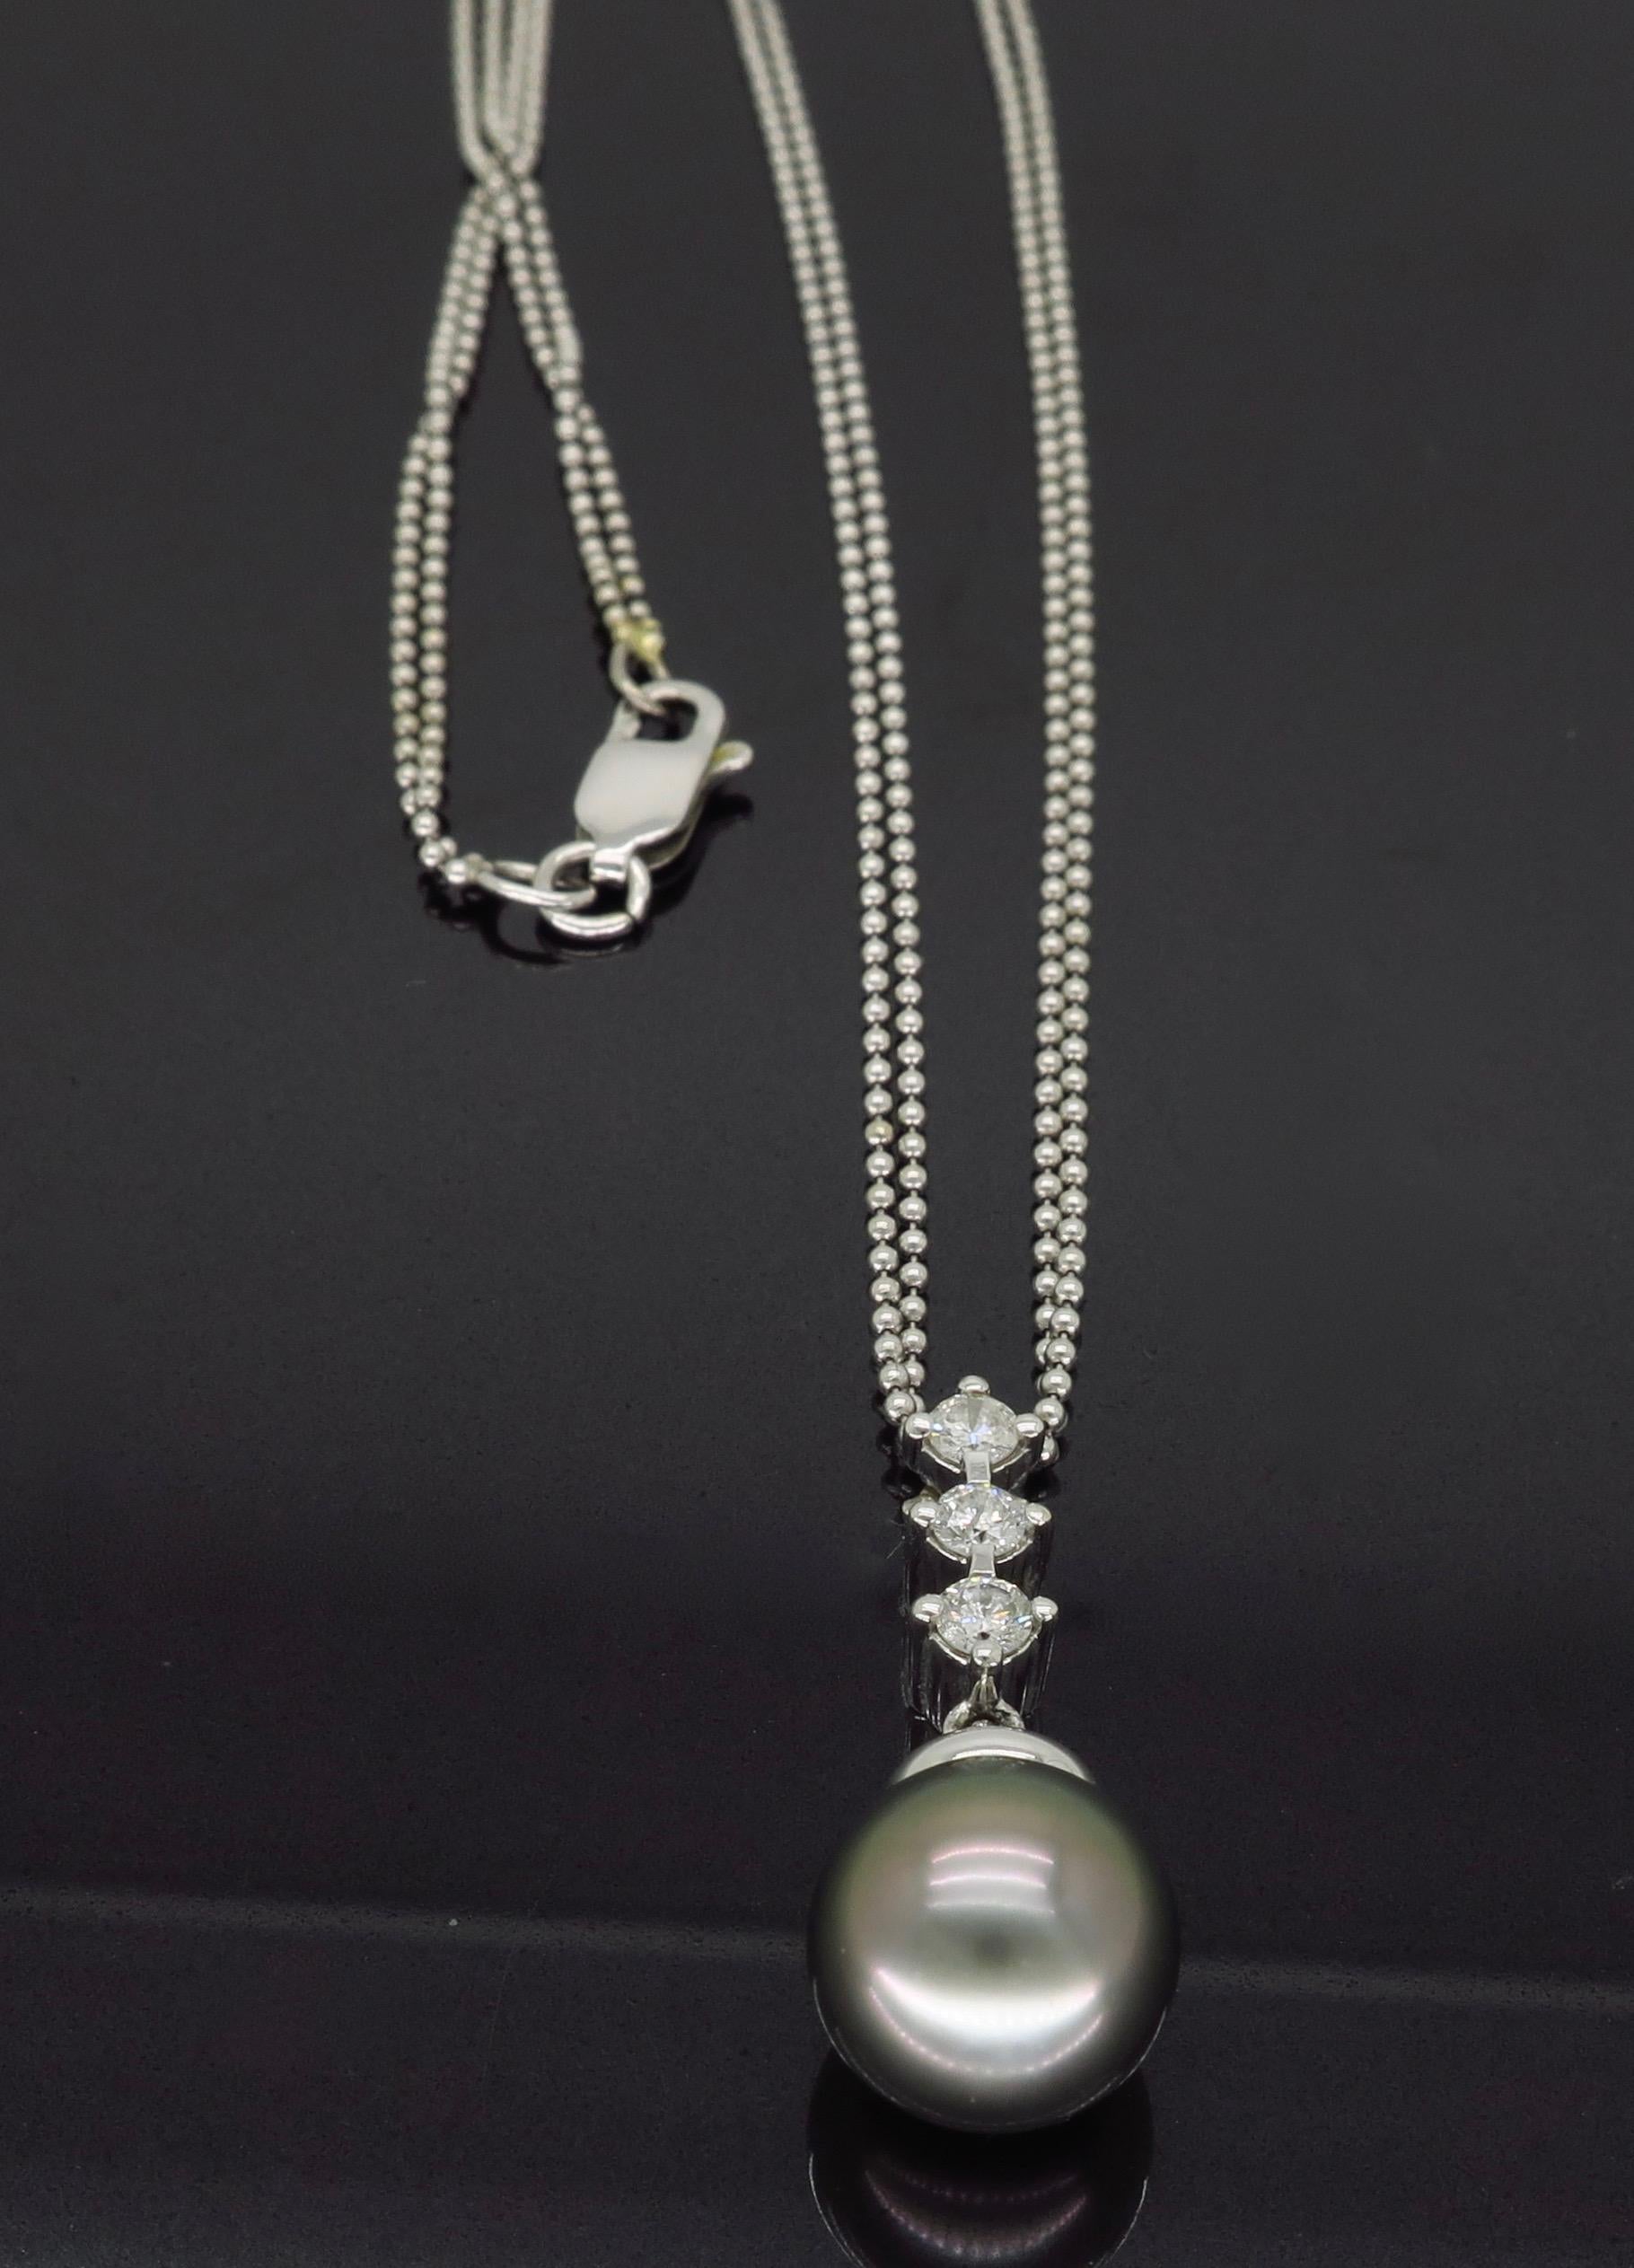 Pearl and diamond drop necklace crafted in 14k white gold.

Gemstone: Tahitian Pearl & Diamond
Gemstone Carat Weight: Approximately 9.45mm
Diamond Carat Weight: Approximately .21ctw
Diamond Cut:  Round Brilliant Cut
Color: Average G-H
Clarity: